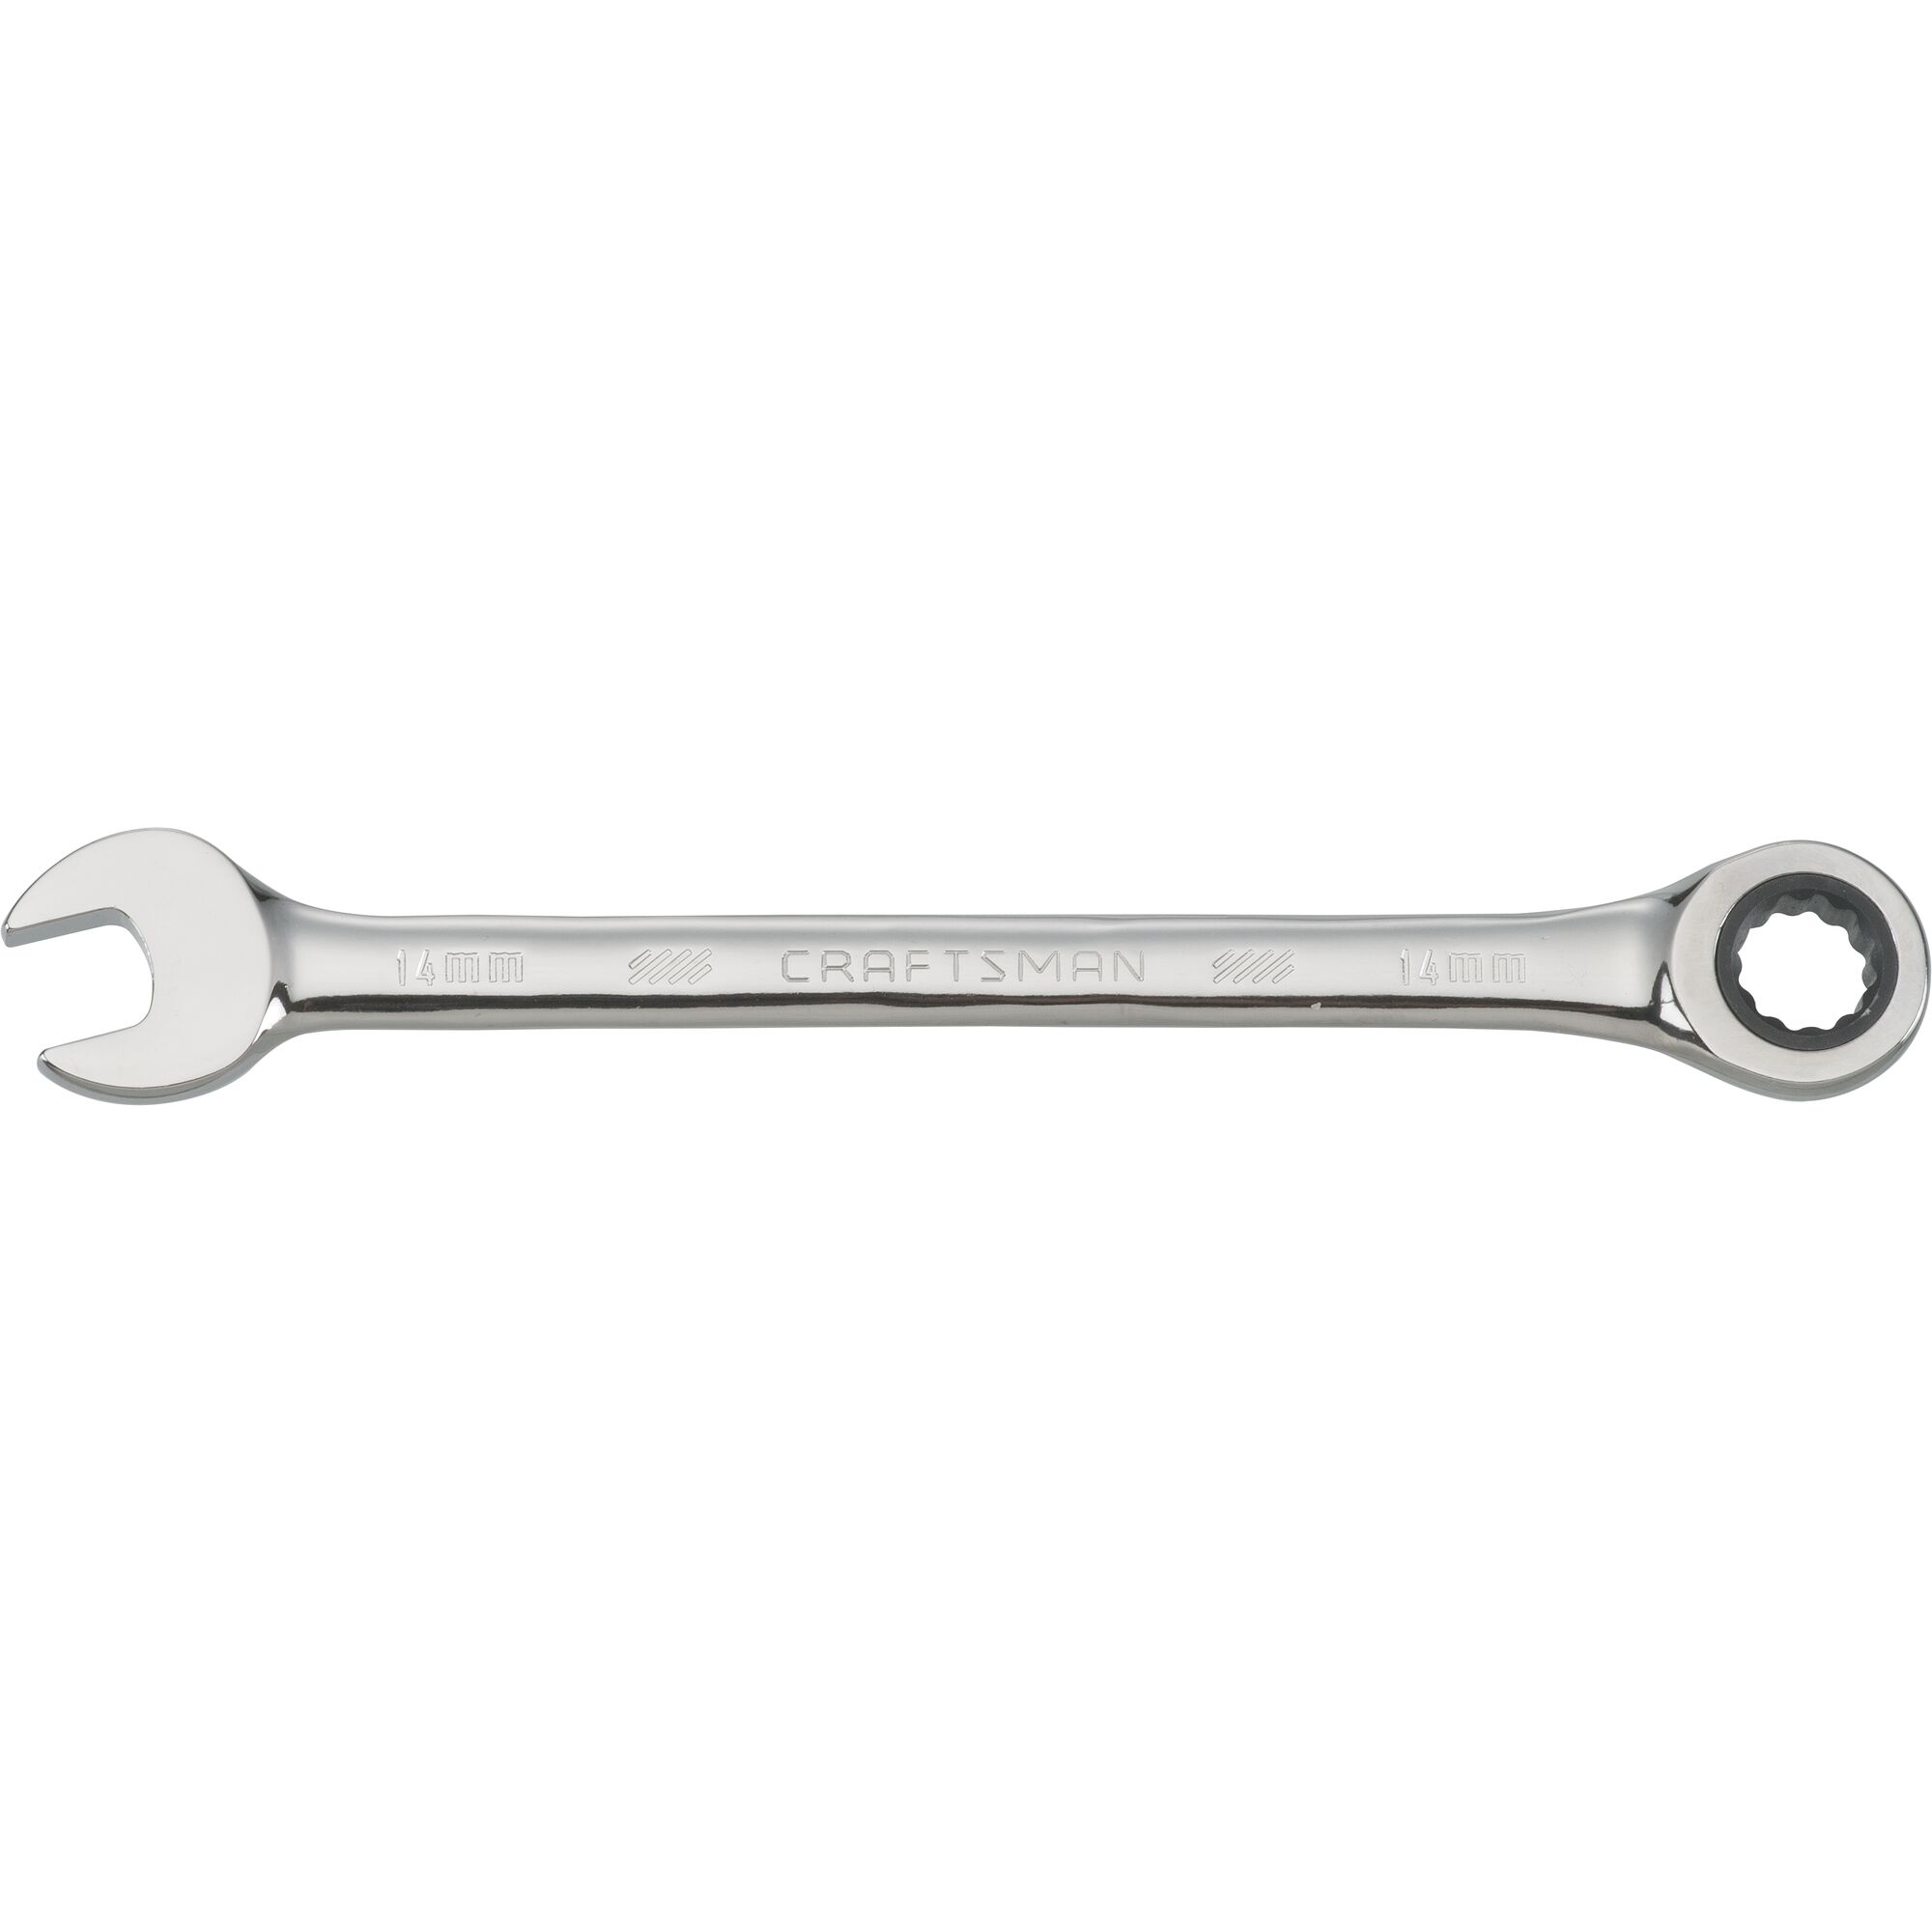 14 millimeter 72 tooth 12 point metric ratcheting wrench.